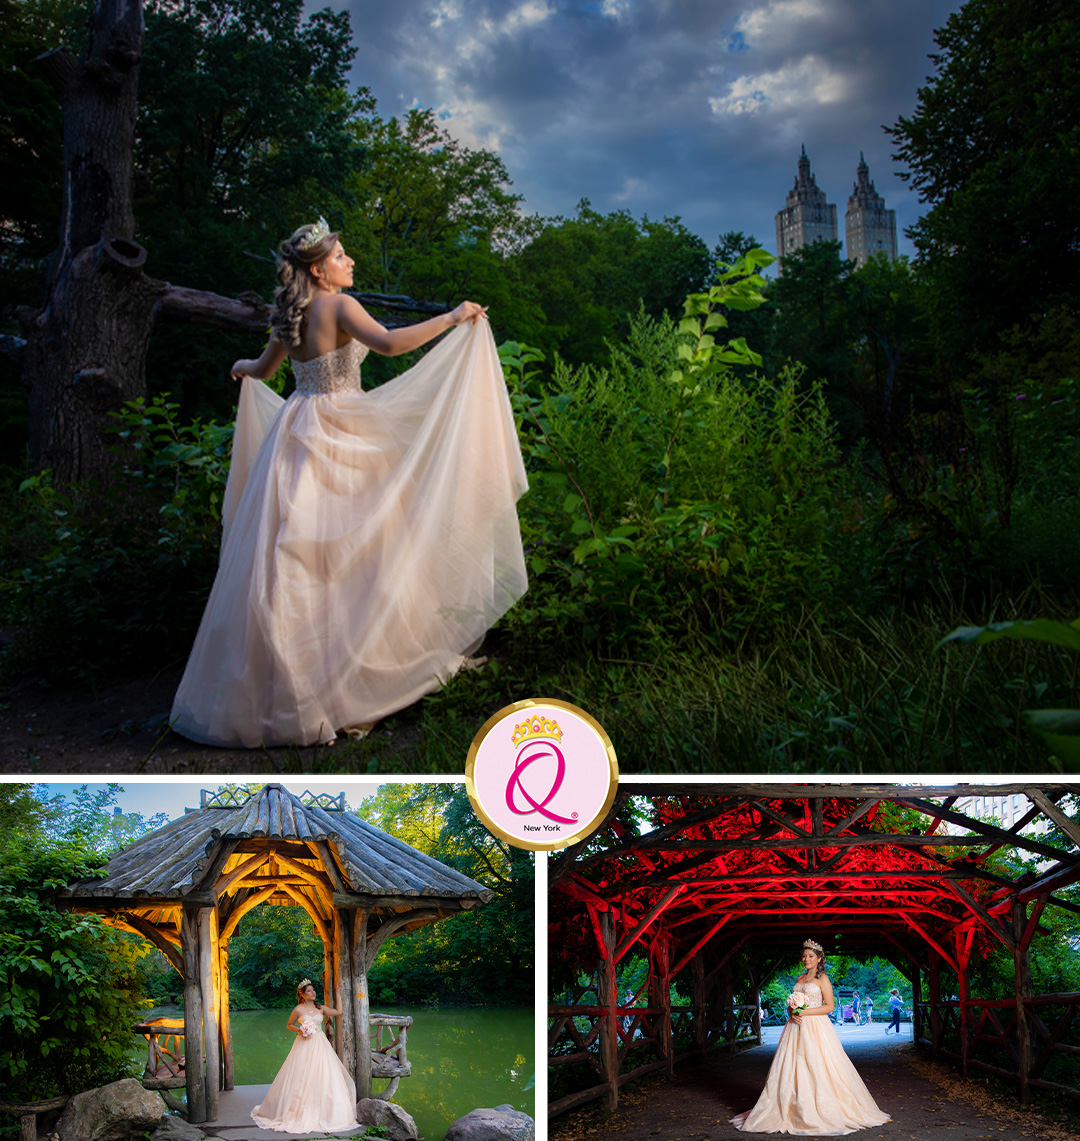 Mary J's Quinceañera Photoshoot in New York